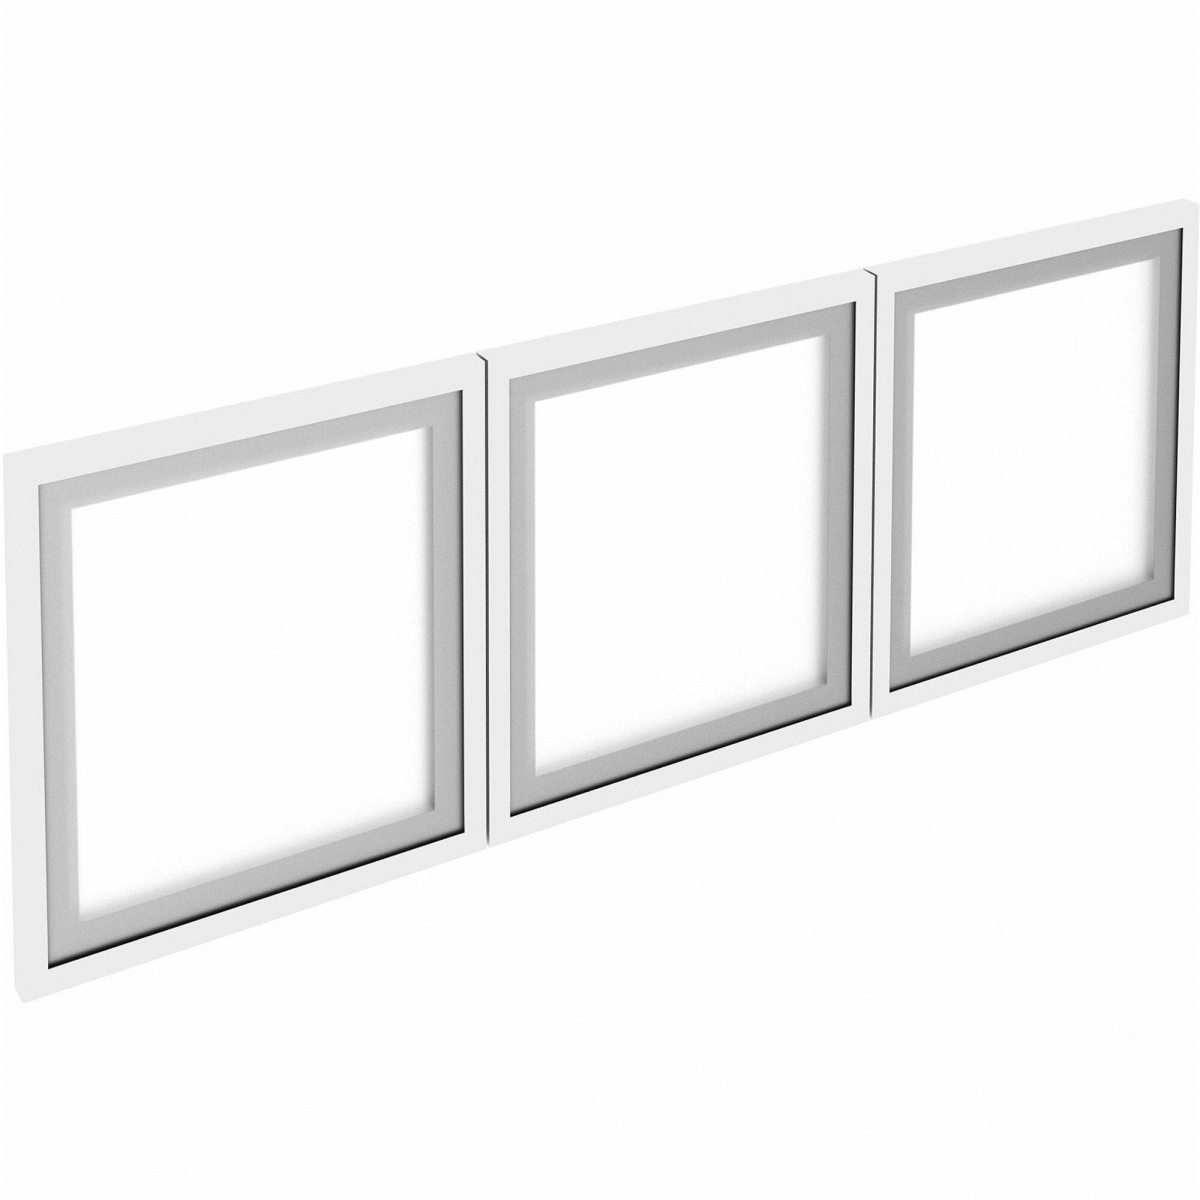 Picture of Lorell Relevance LLR59710 48 in. Wall-Mount Hutch Frosted Glass Door - Pack of 3